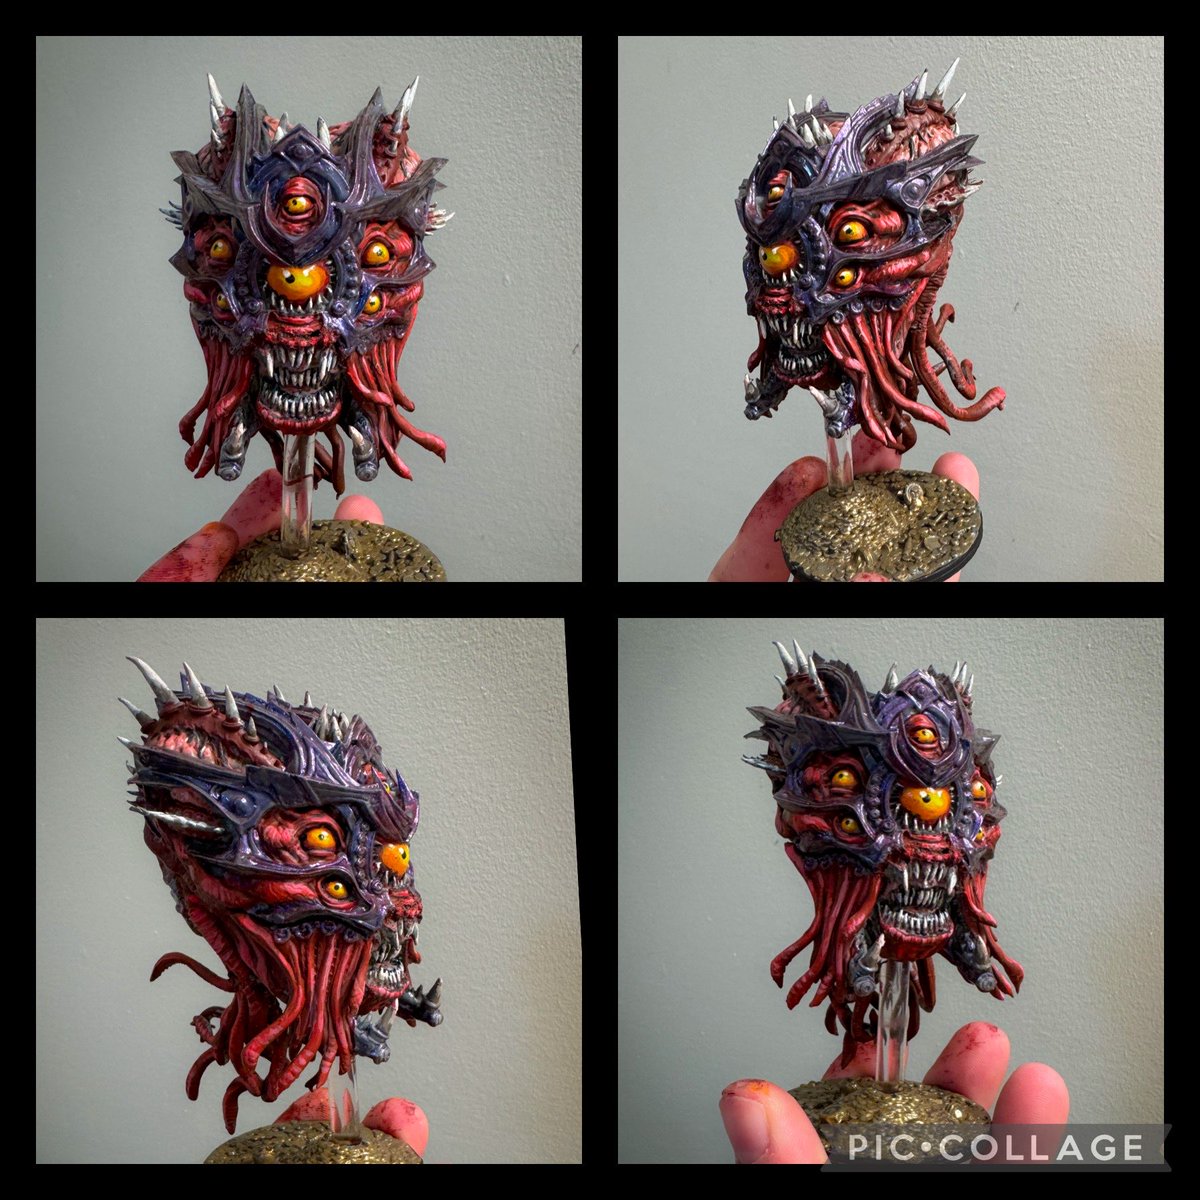 @mattcolville @helloMCDM @JamesIntrocaso My Wife got to painting her version of Xorannox the Overmind. Can't wait to use it against the party next session .